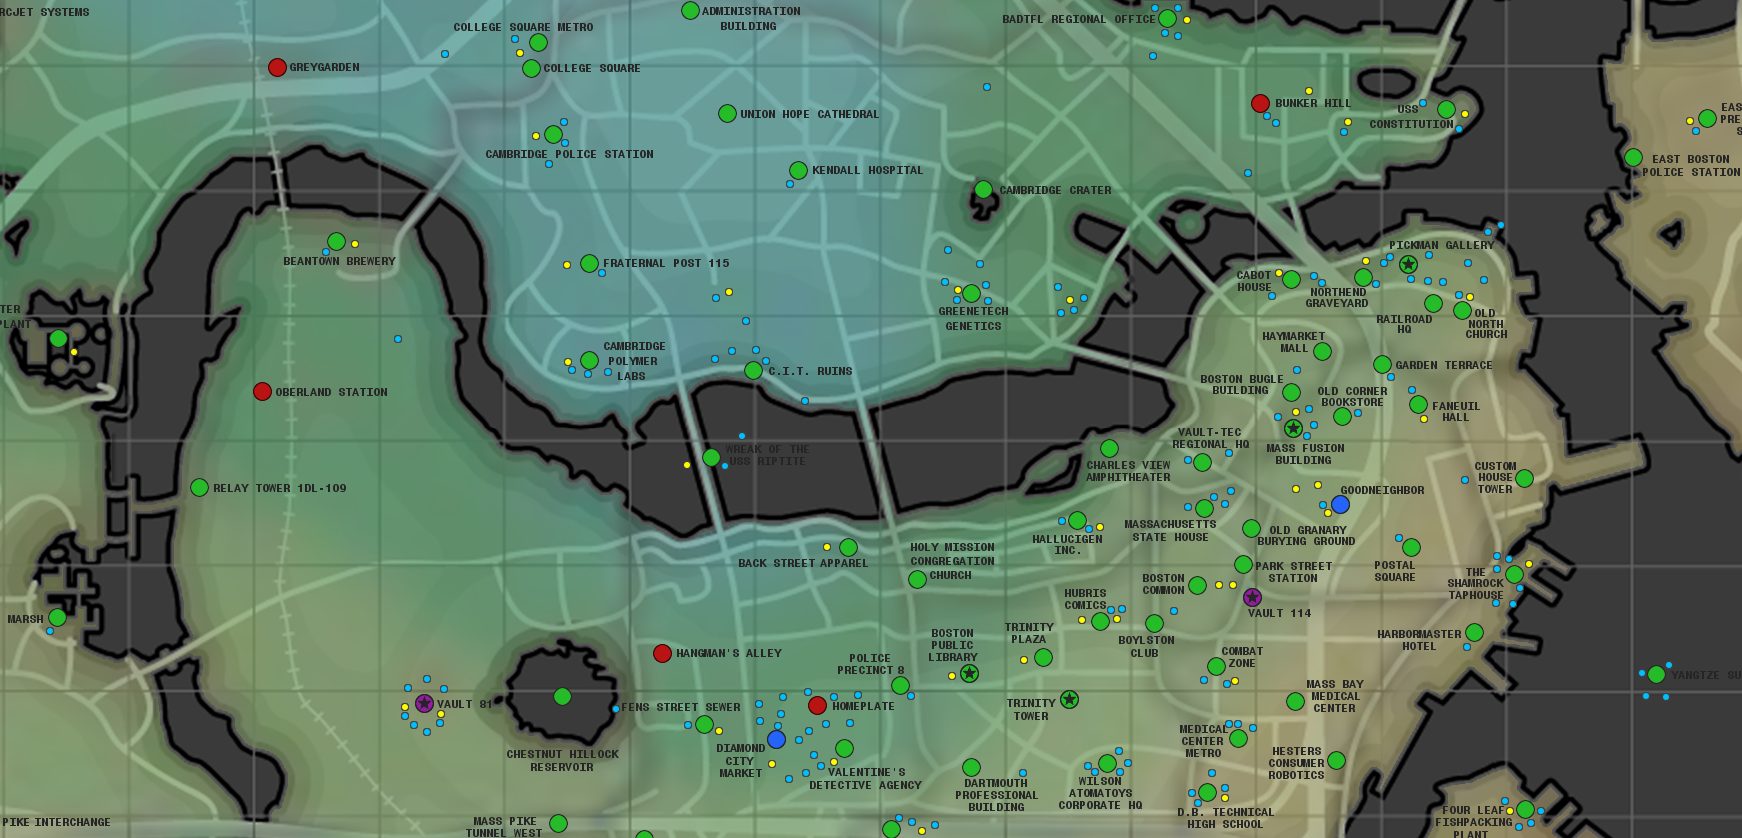 Fallout 4 Map Locations And Fallout 4 Game of the Year Edition Giveaway